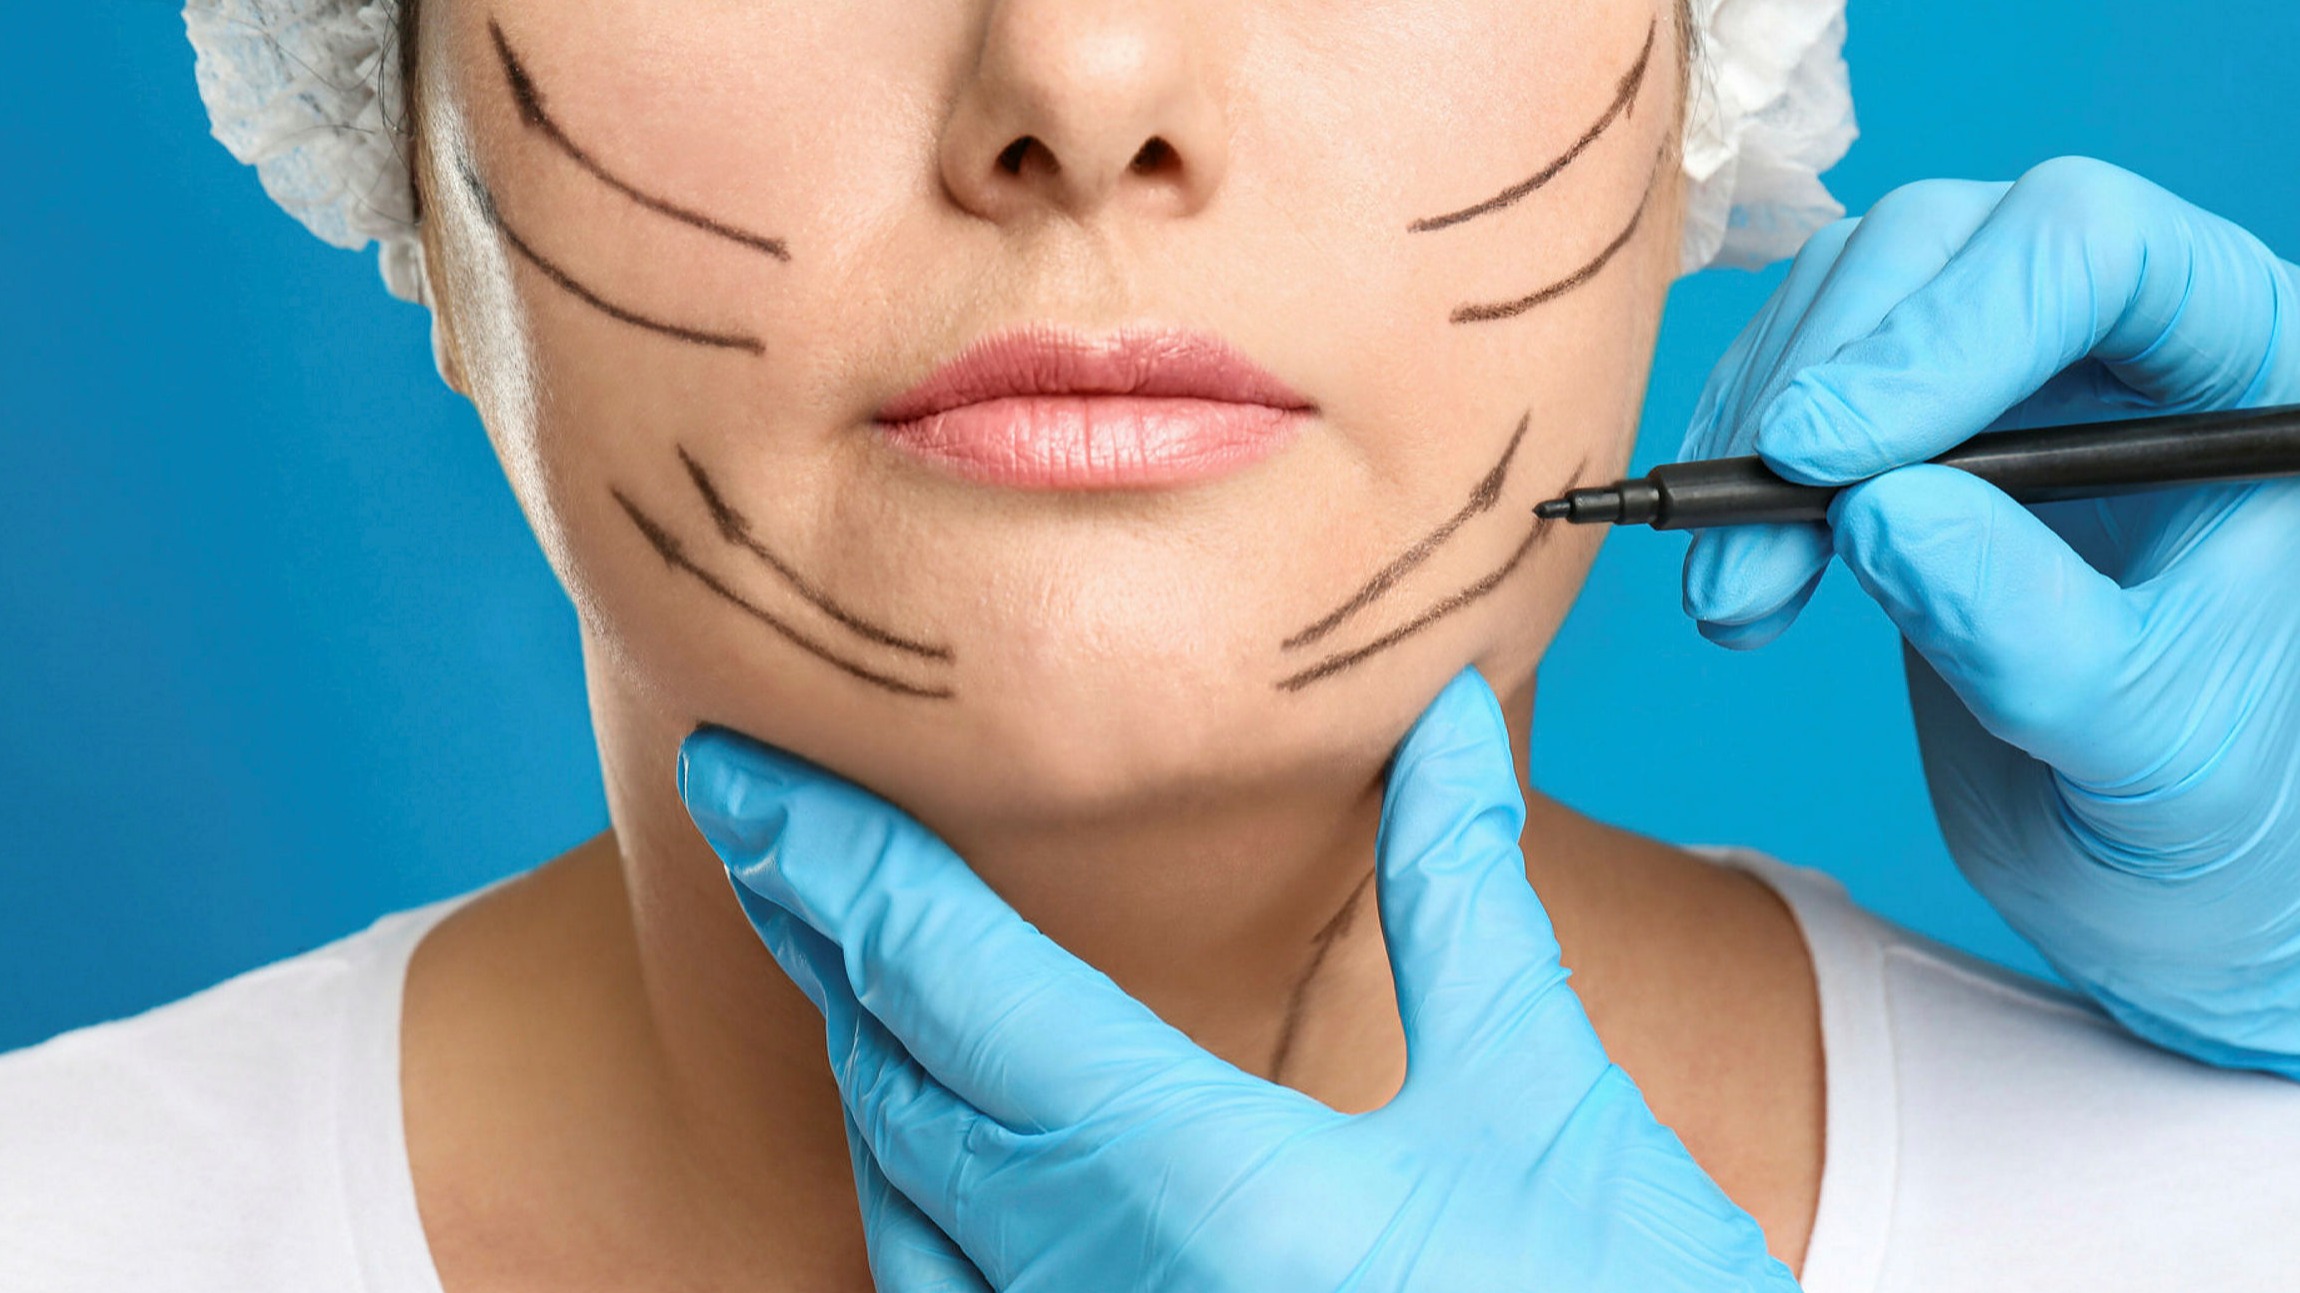 Andrew P. Trussler Md - Plastic Surgery